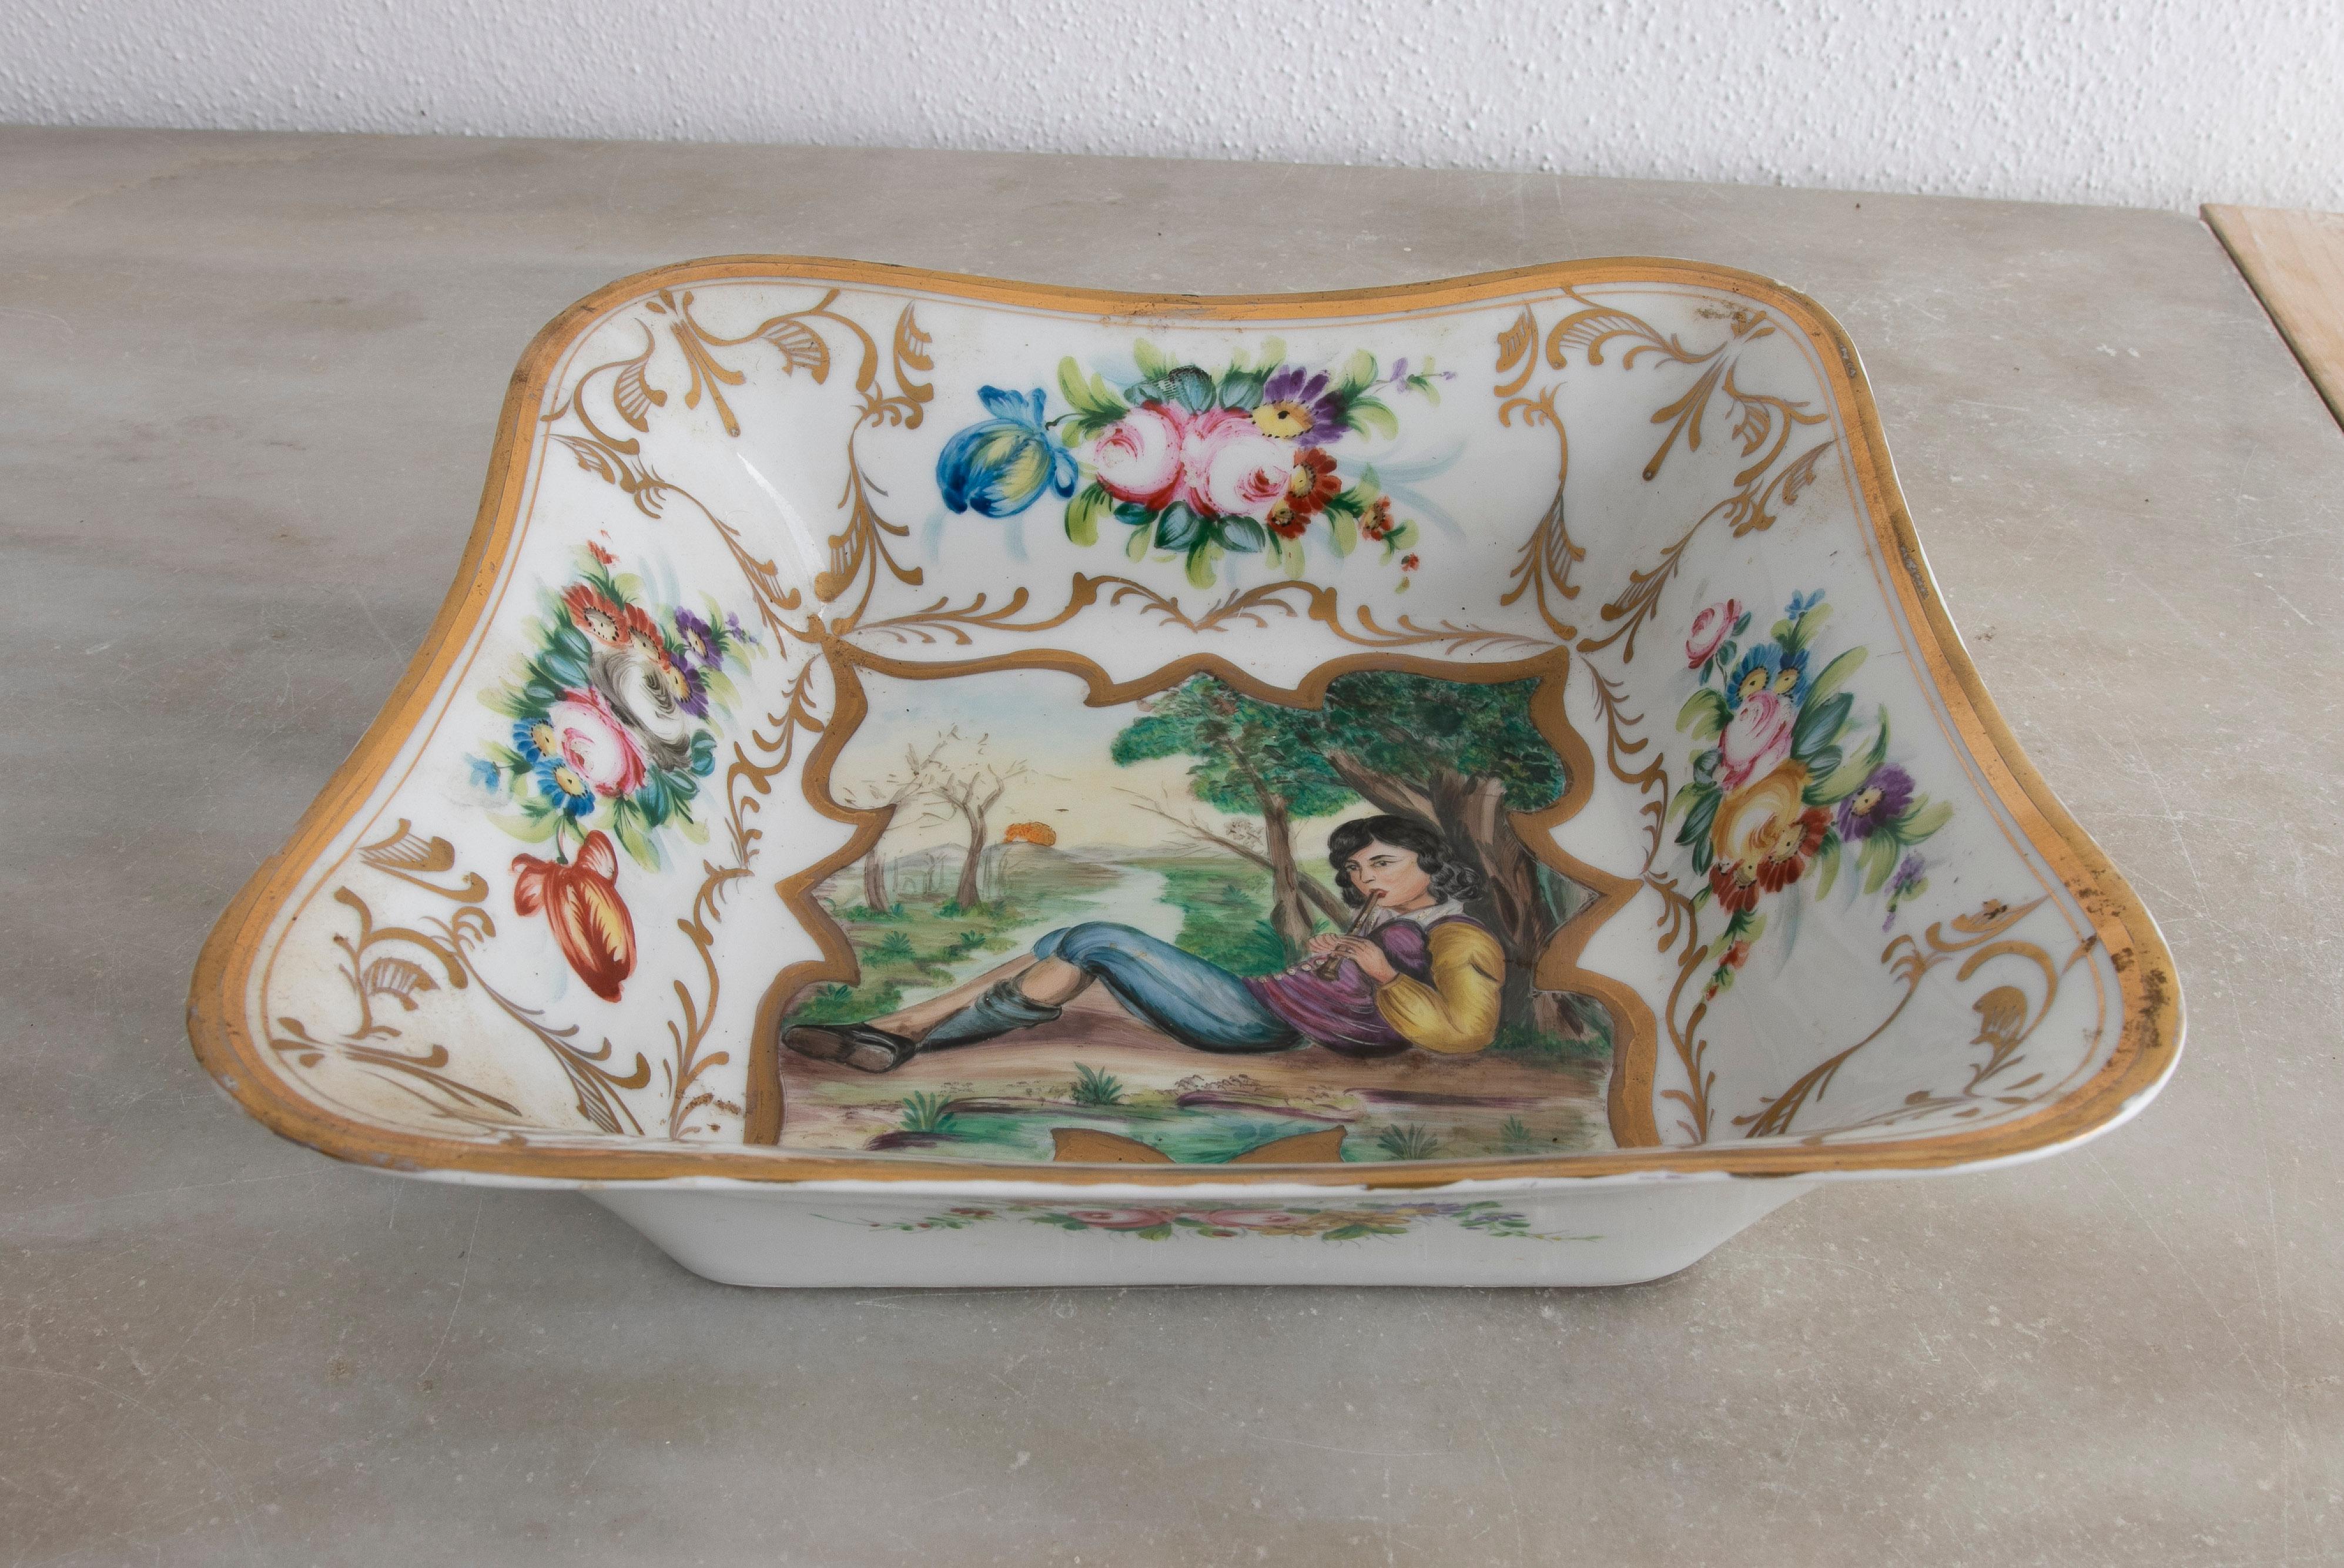 Original 1950s German Meissen stamped porcelain painted tray with boy playing the flute vignette and typical flower decorations.